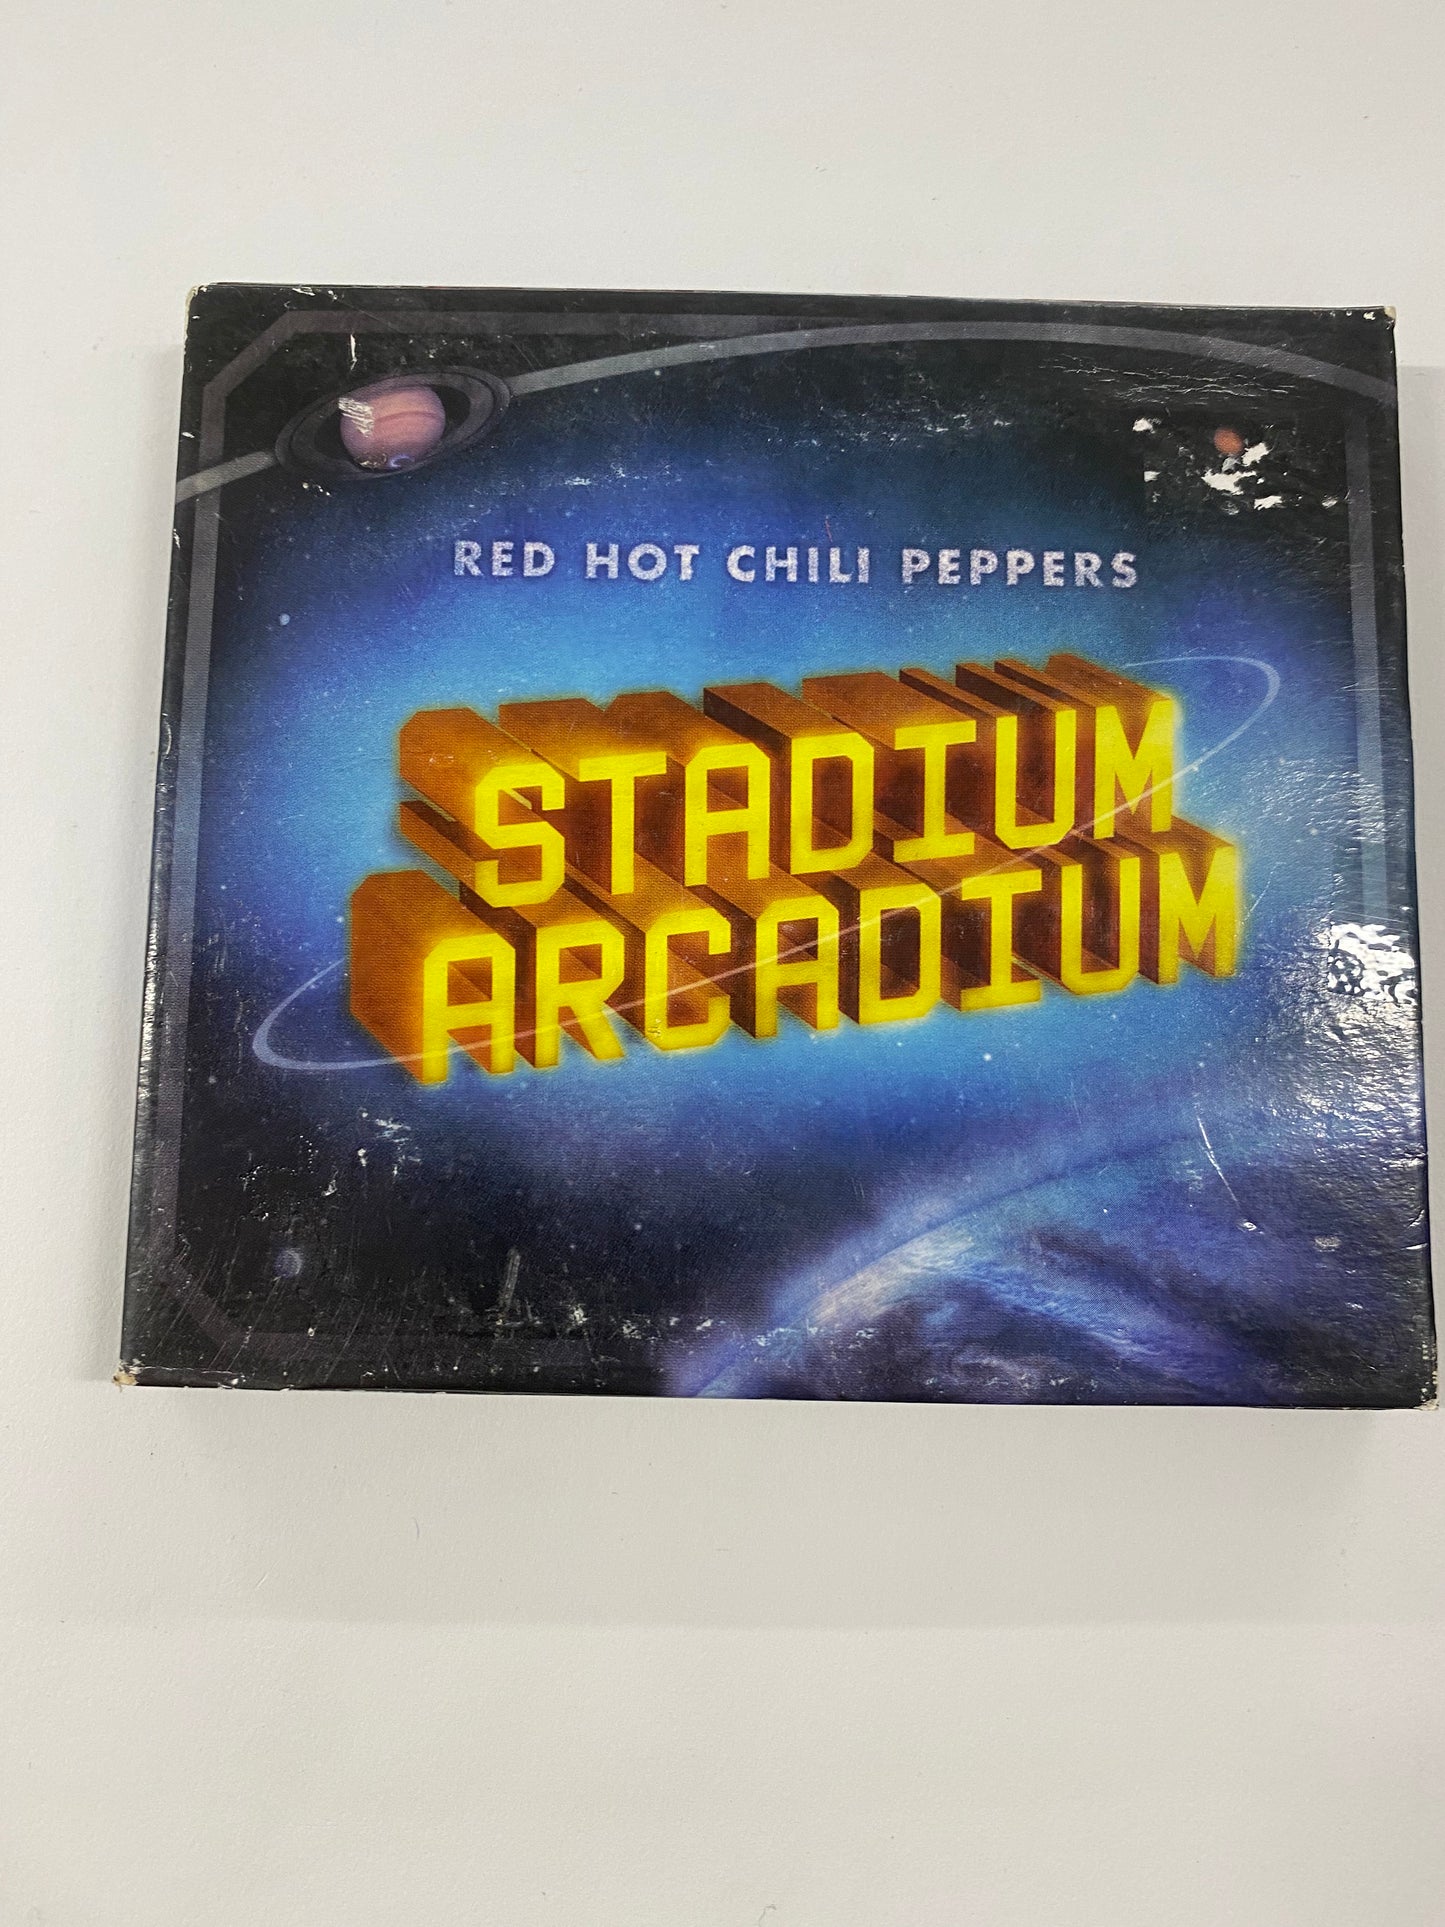 Red Hot Chili Peppers 1135